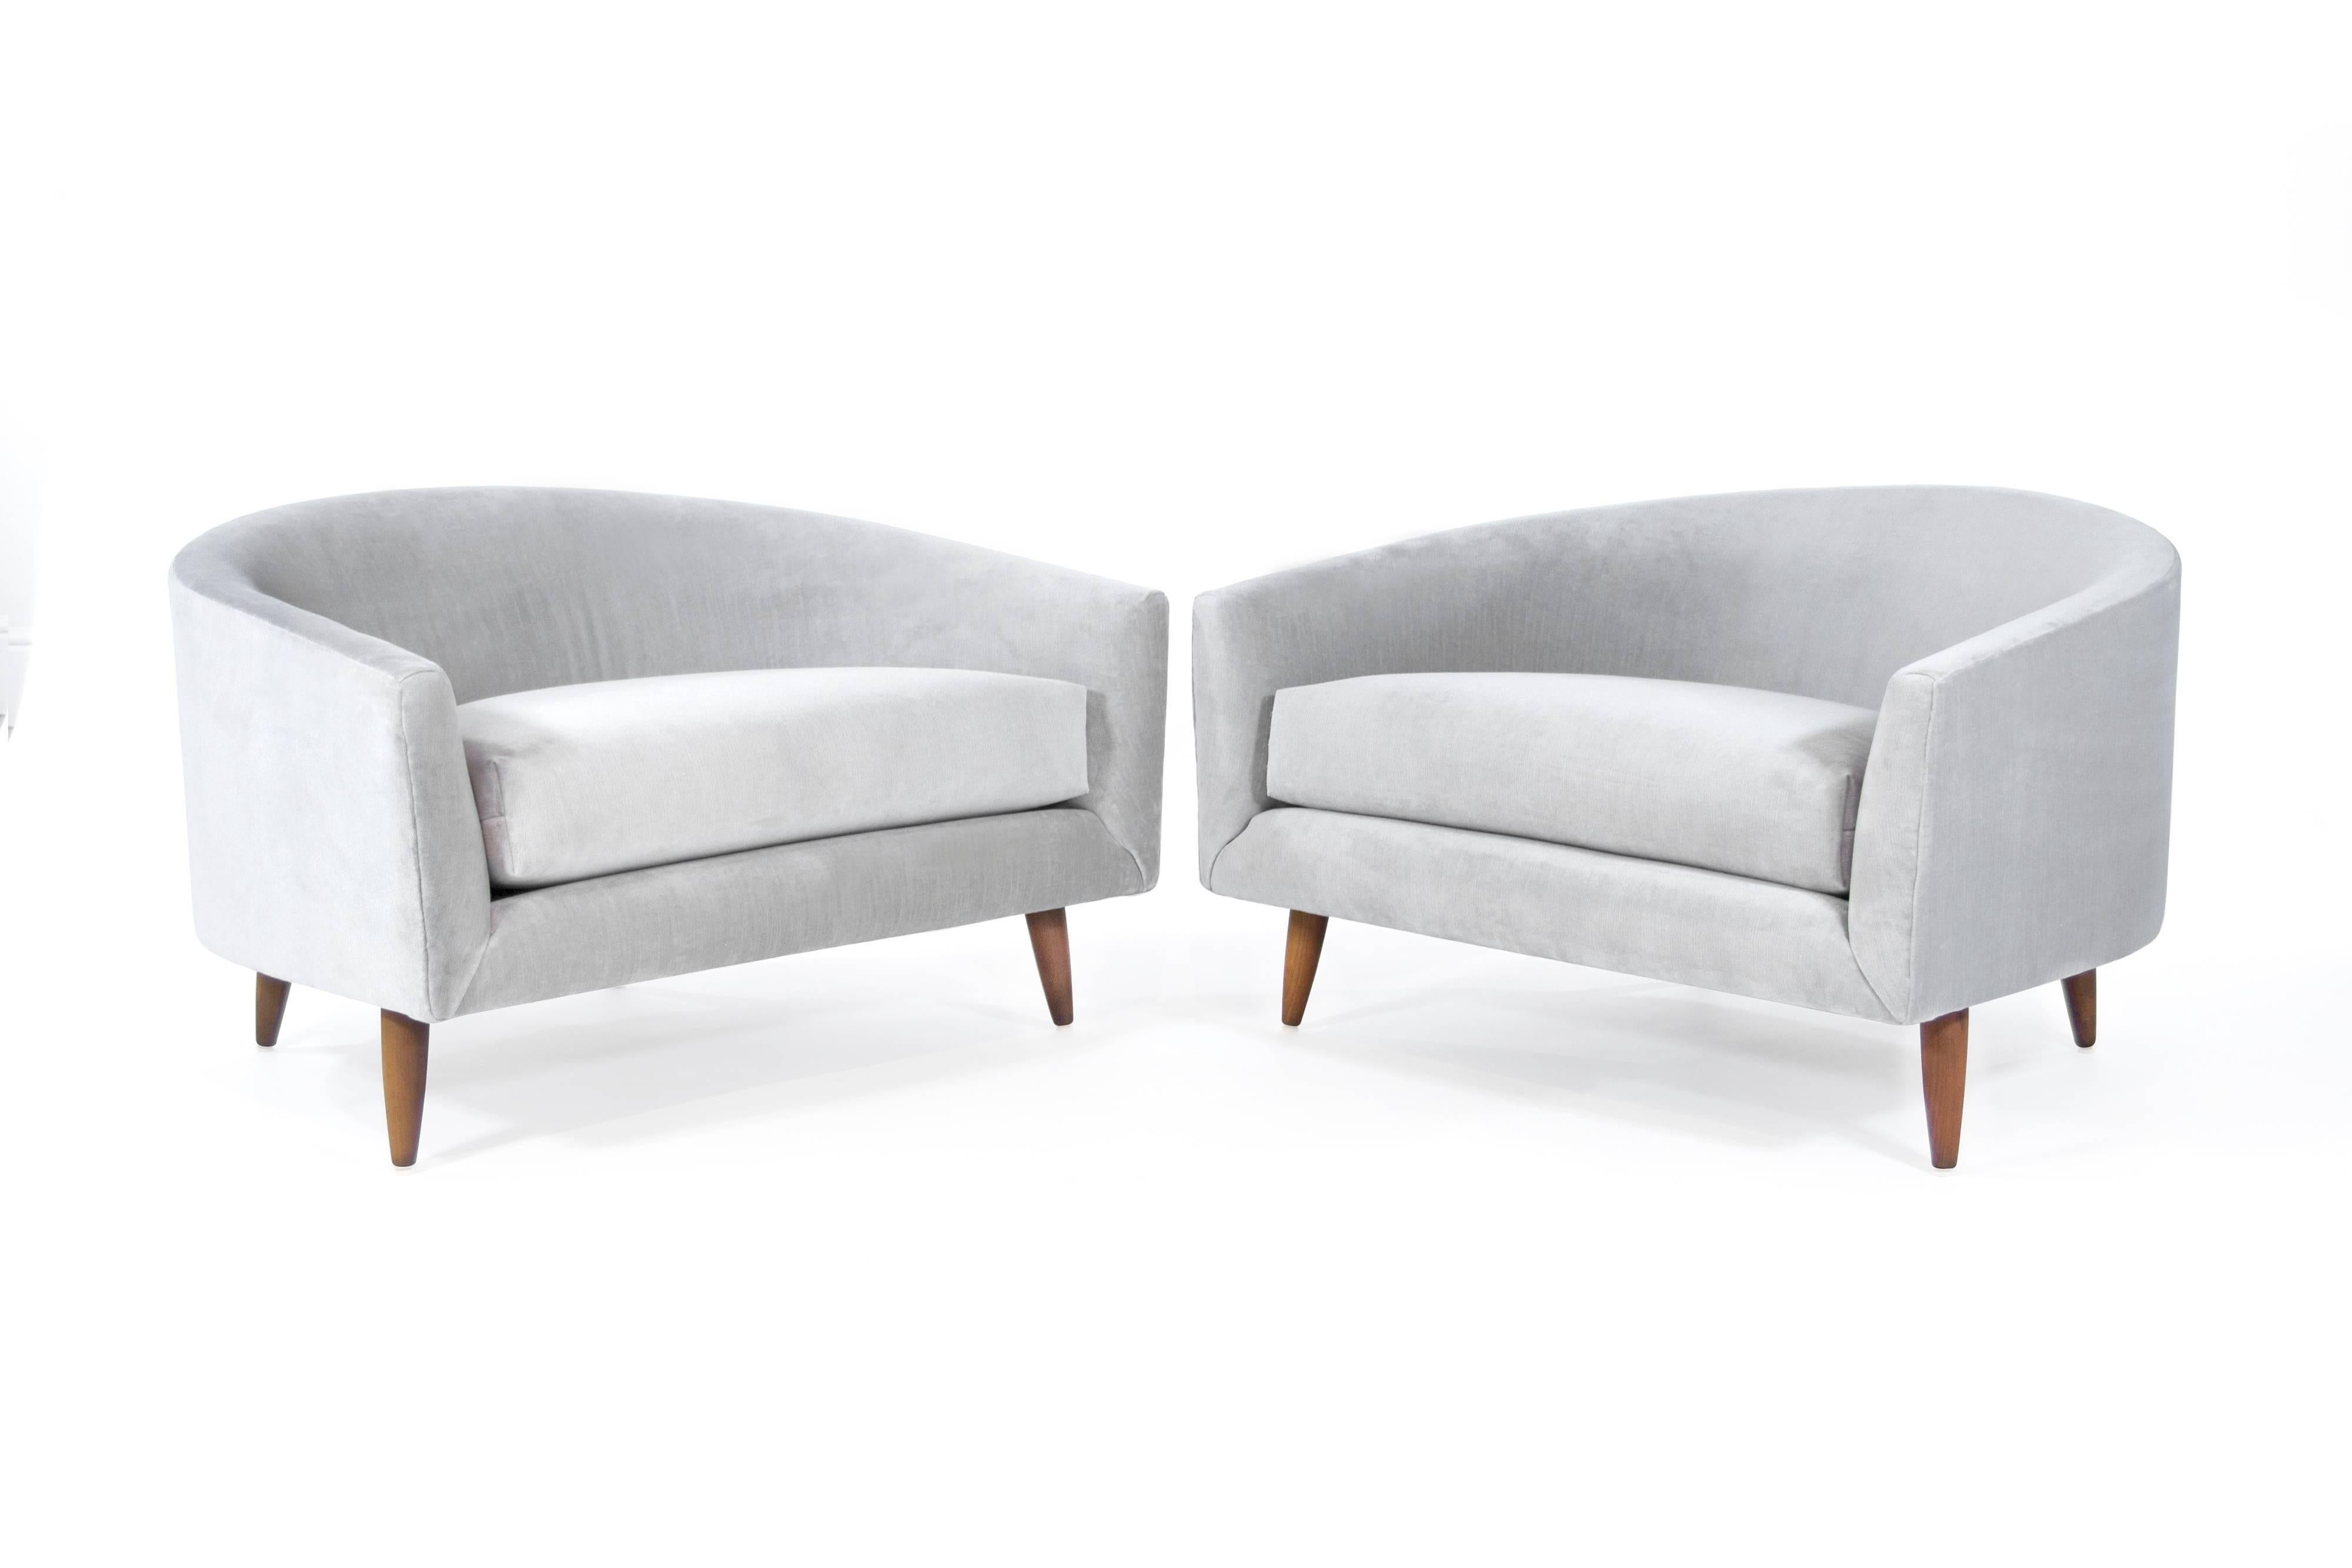 Rare pair of low and wide profile, lounge chairs designed by Adrian Pearsall for Craft Associates. Extremely comfortable! Perhaps one of Adrian's best designs.

Newly upholstered in Cannes velvet cannon grey by JB Martin. Walnut legs fully